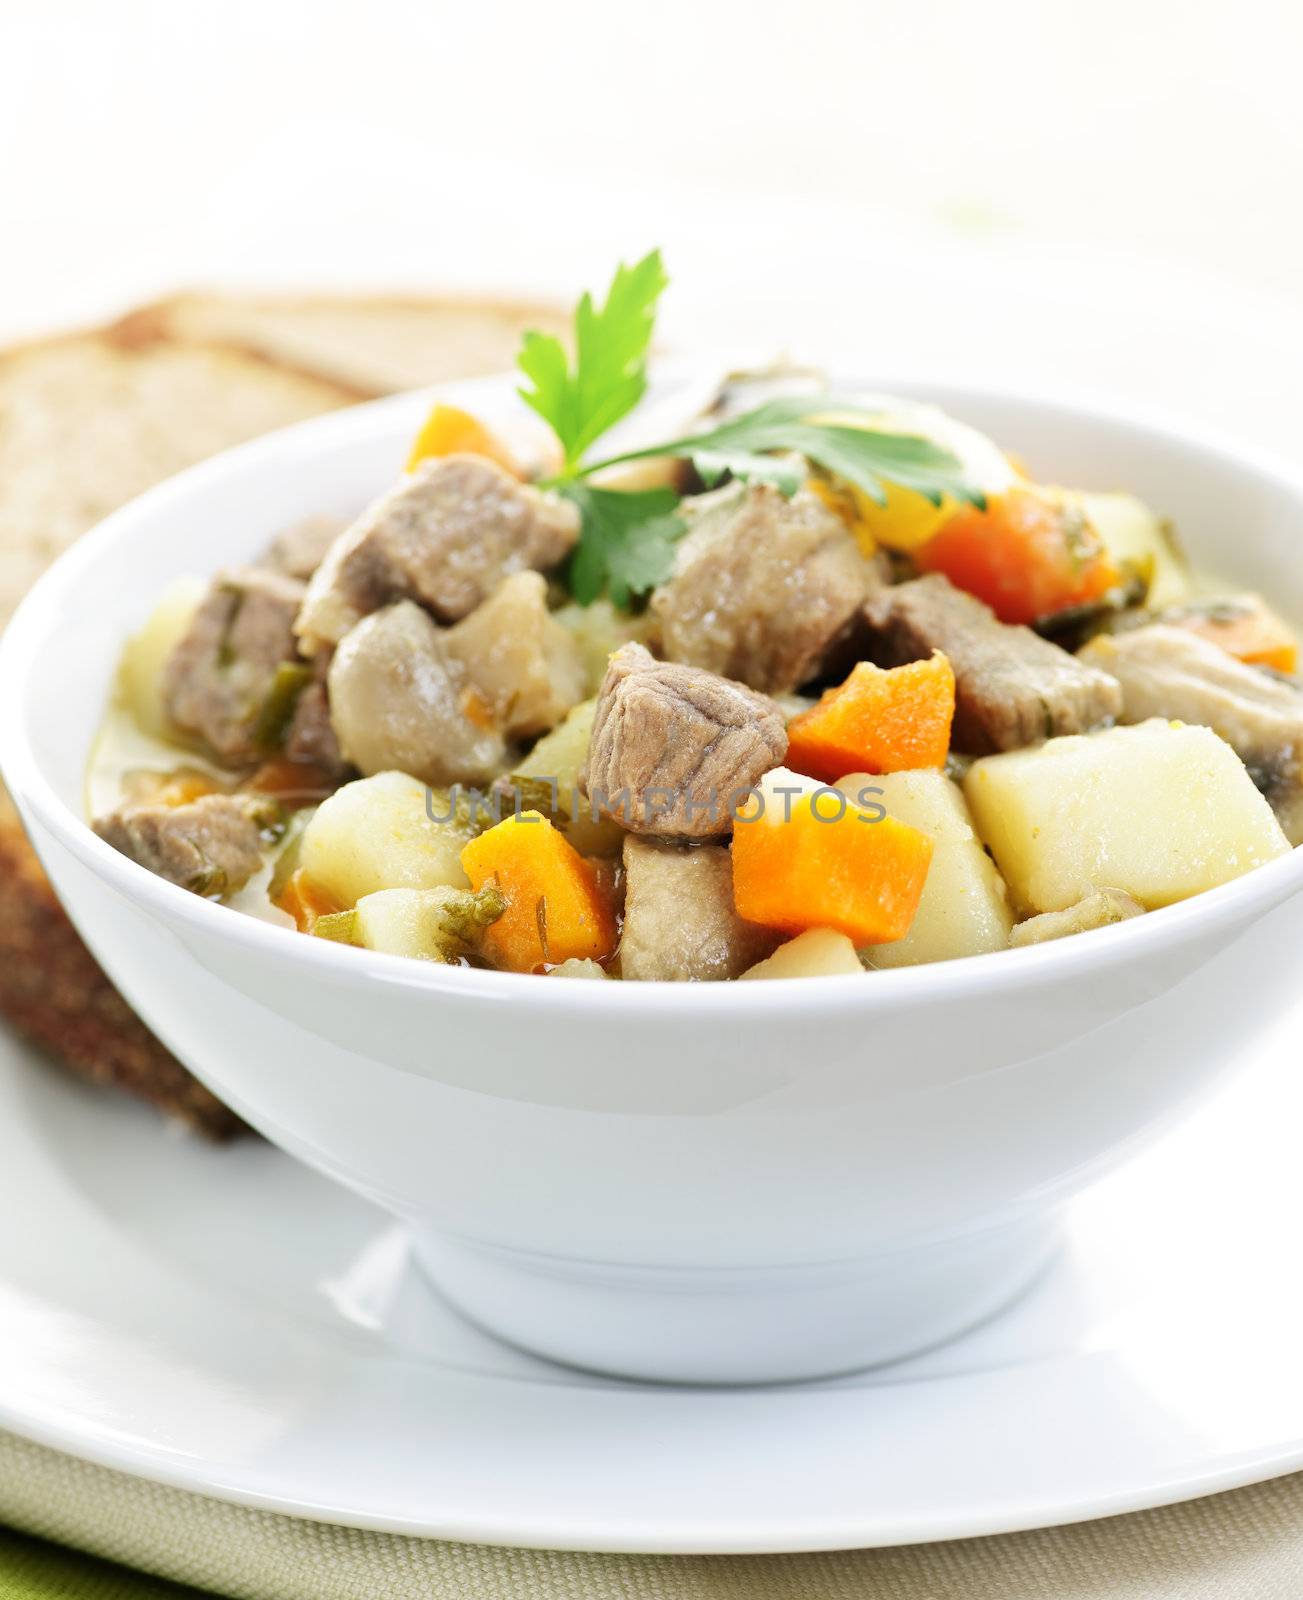 Bowl of hearty beef stew with vegetables served with rye bread